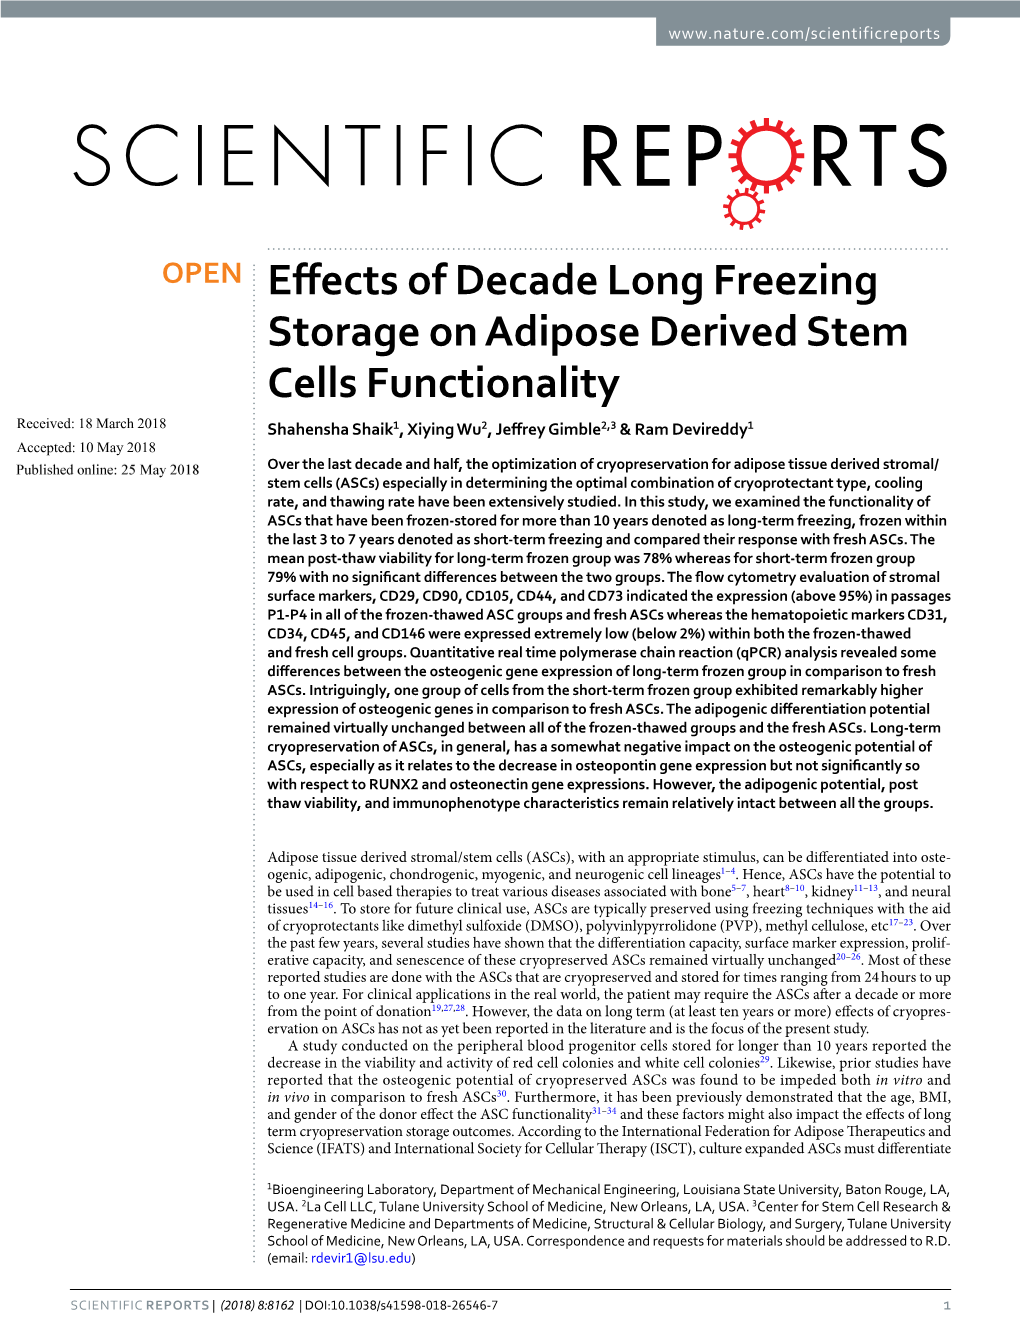 Effects of Decade Long Freezing Storage on Adipose Derived Stem